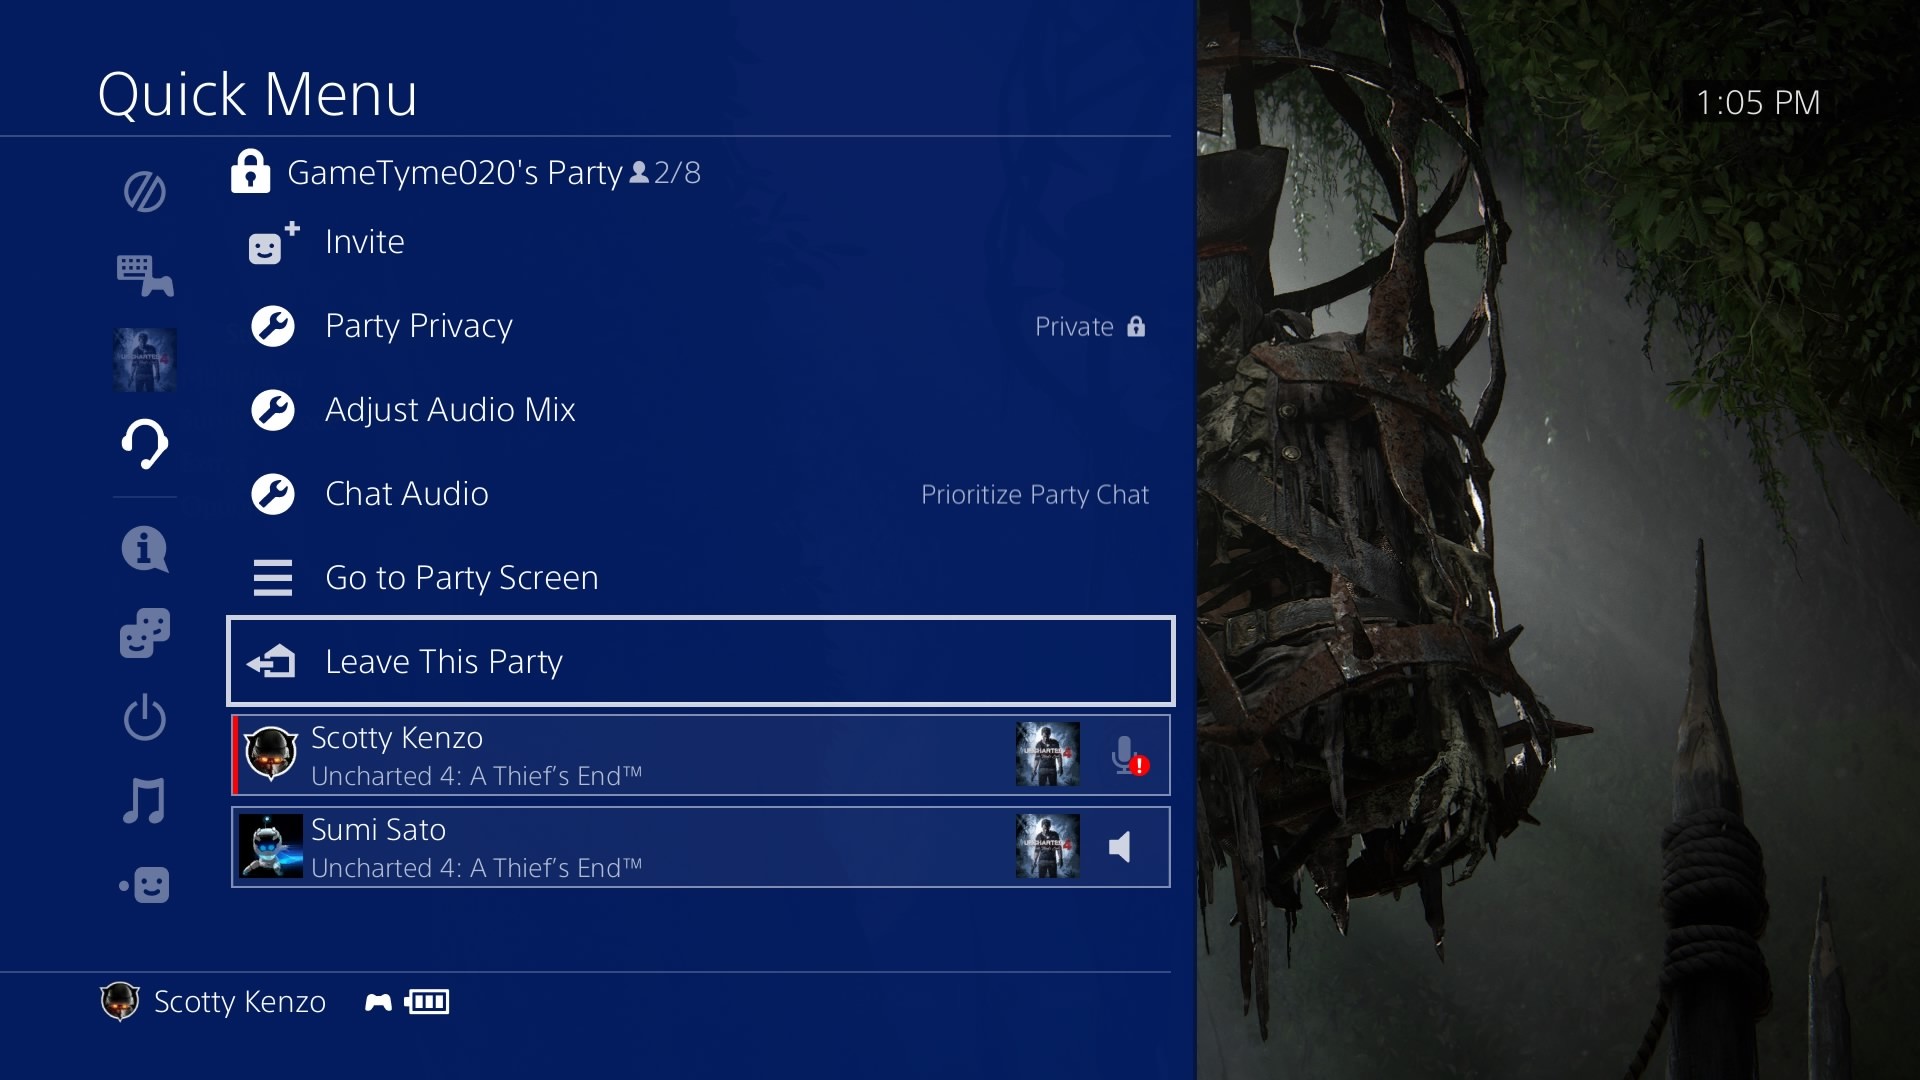 download ps4 update file for reinstallation